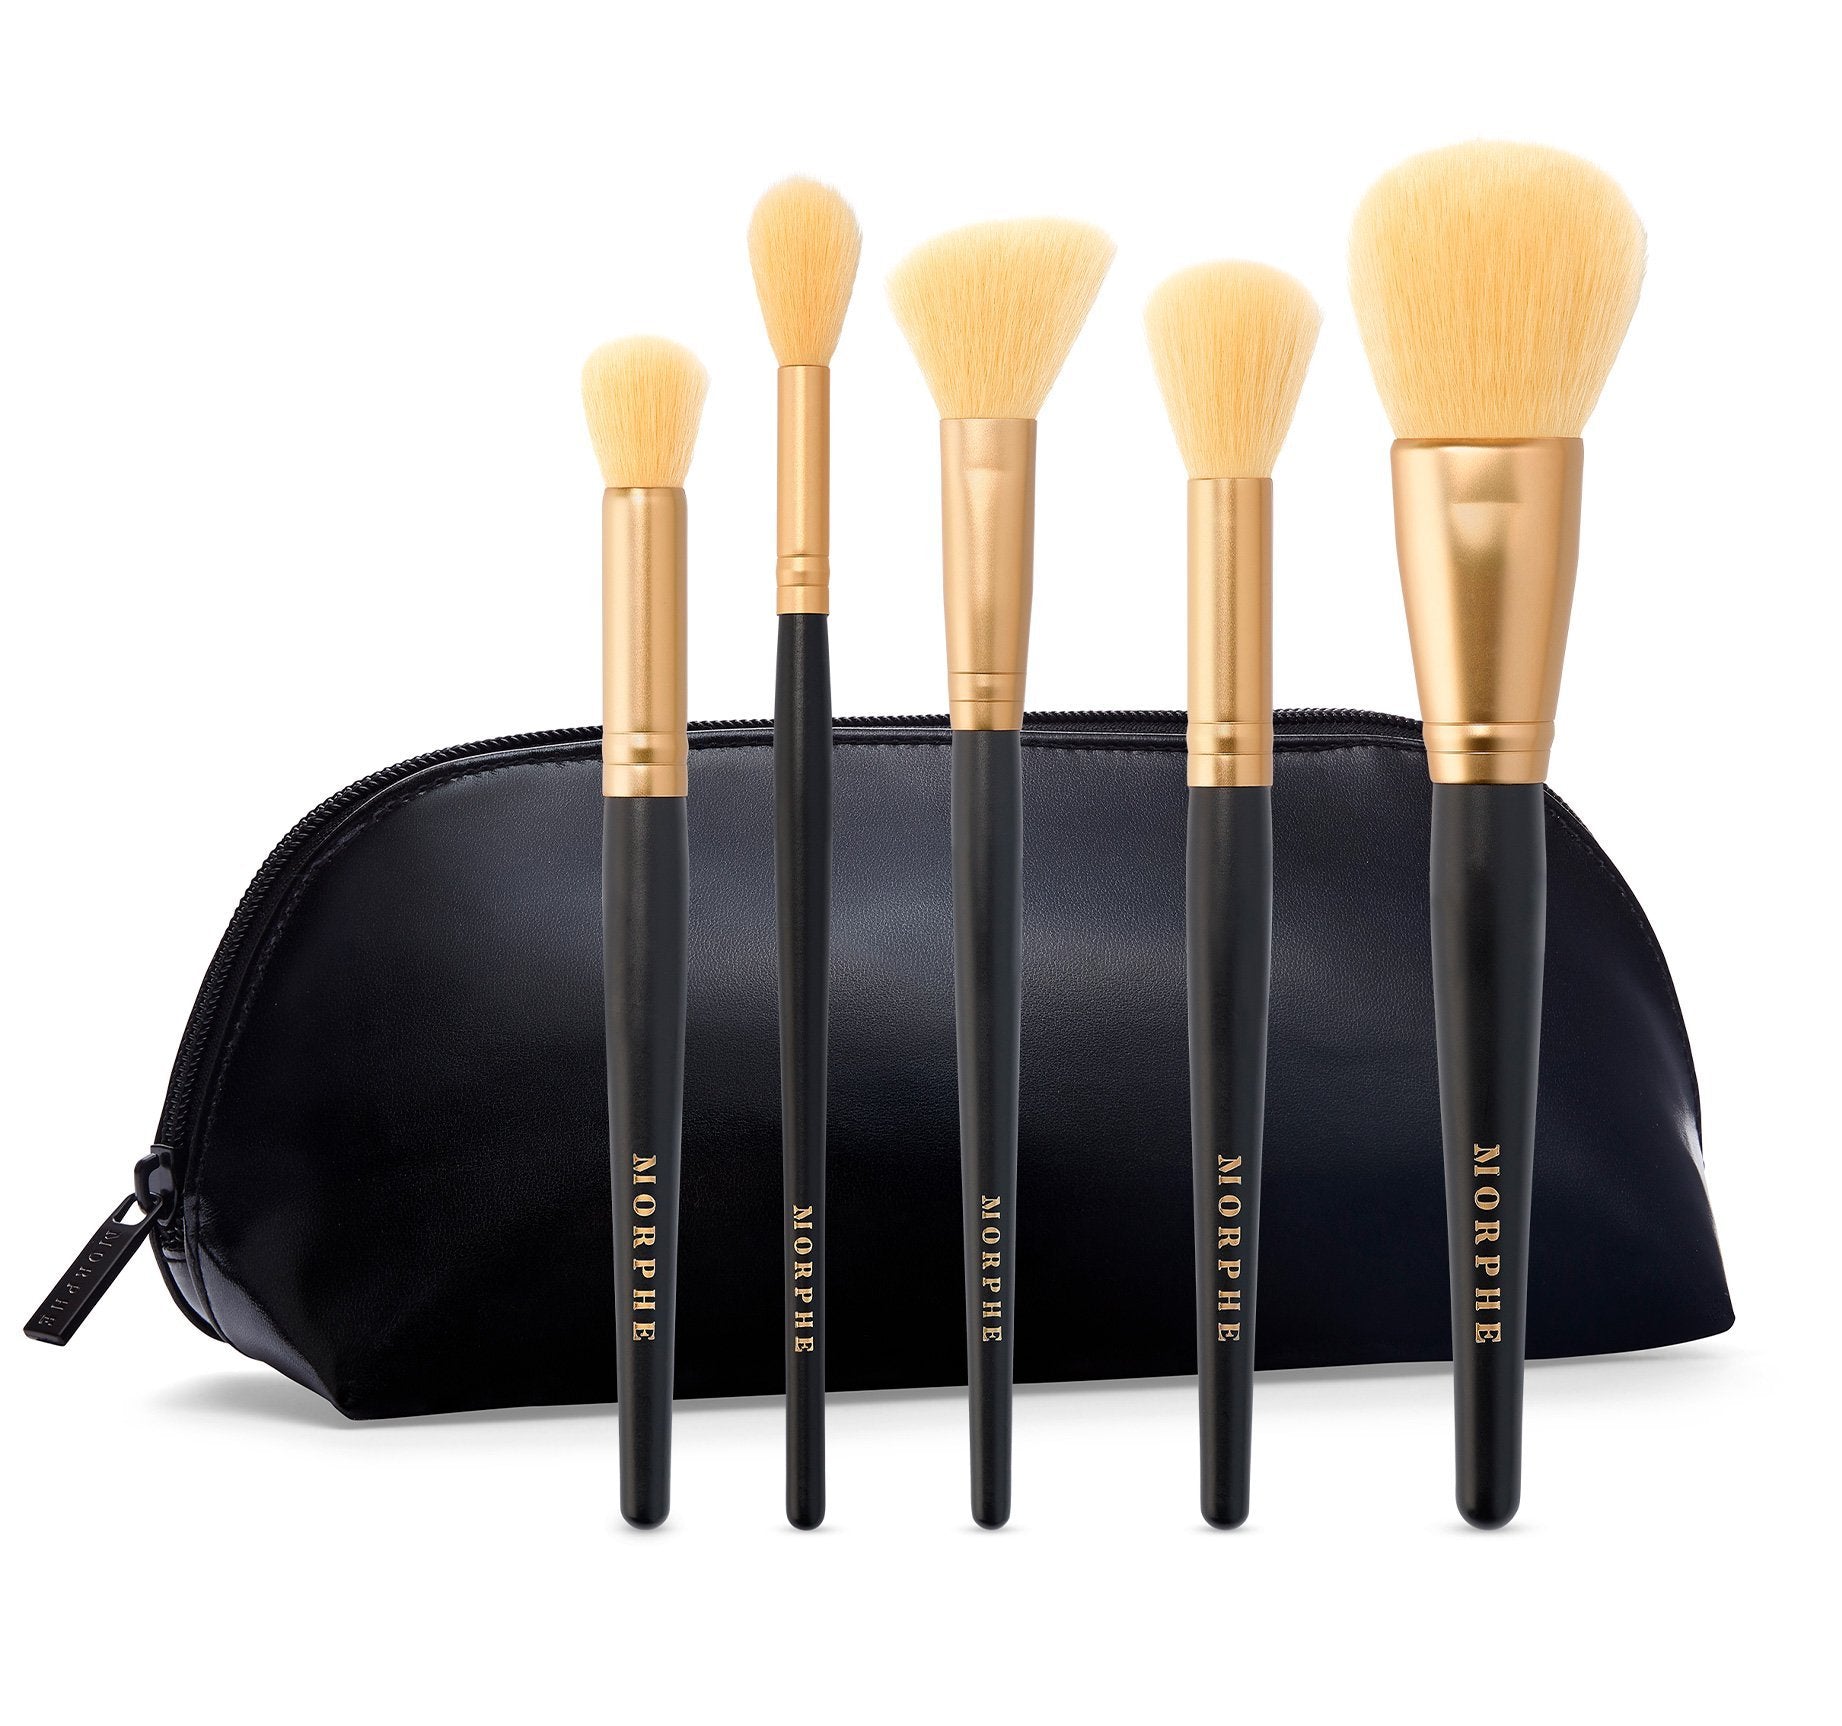 Complexion Crew Face Brush Collection